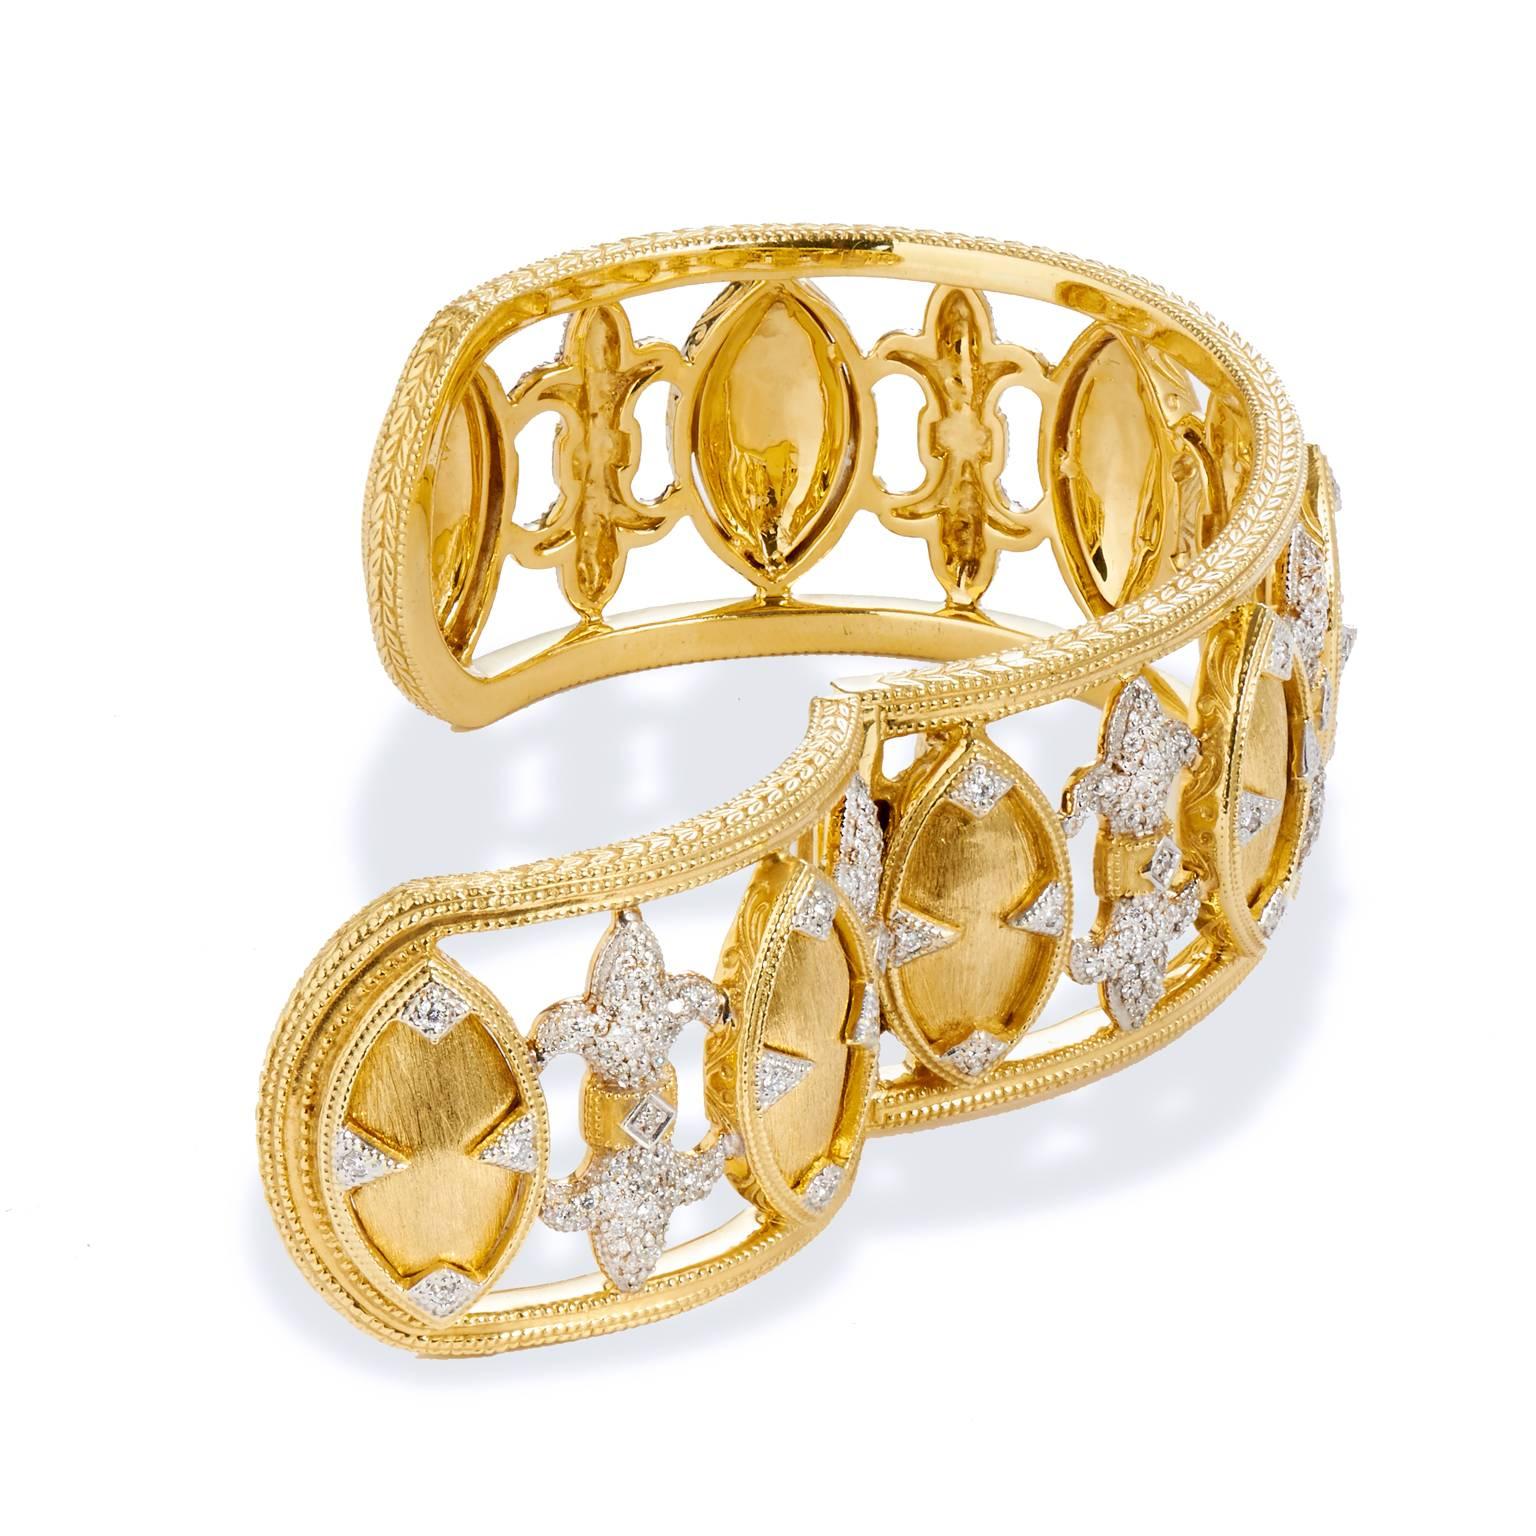 Jude Frances Marquis Fleur 2.28 carat Diamond and 18 karat Gold Cuff Bracelet

Combining classic elegance with on trend shapes and styles, Jude Frances Jewelry, is a much desired designer. This bracelet features a beautifully feminine Marquis Fleur